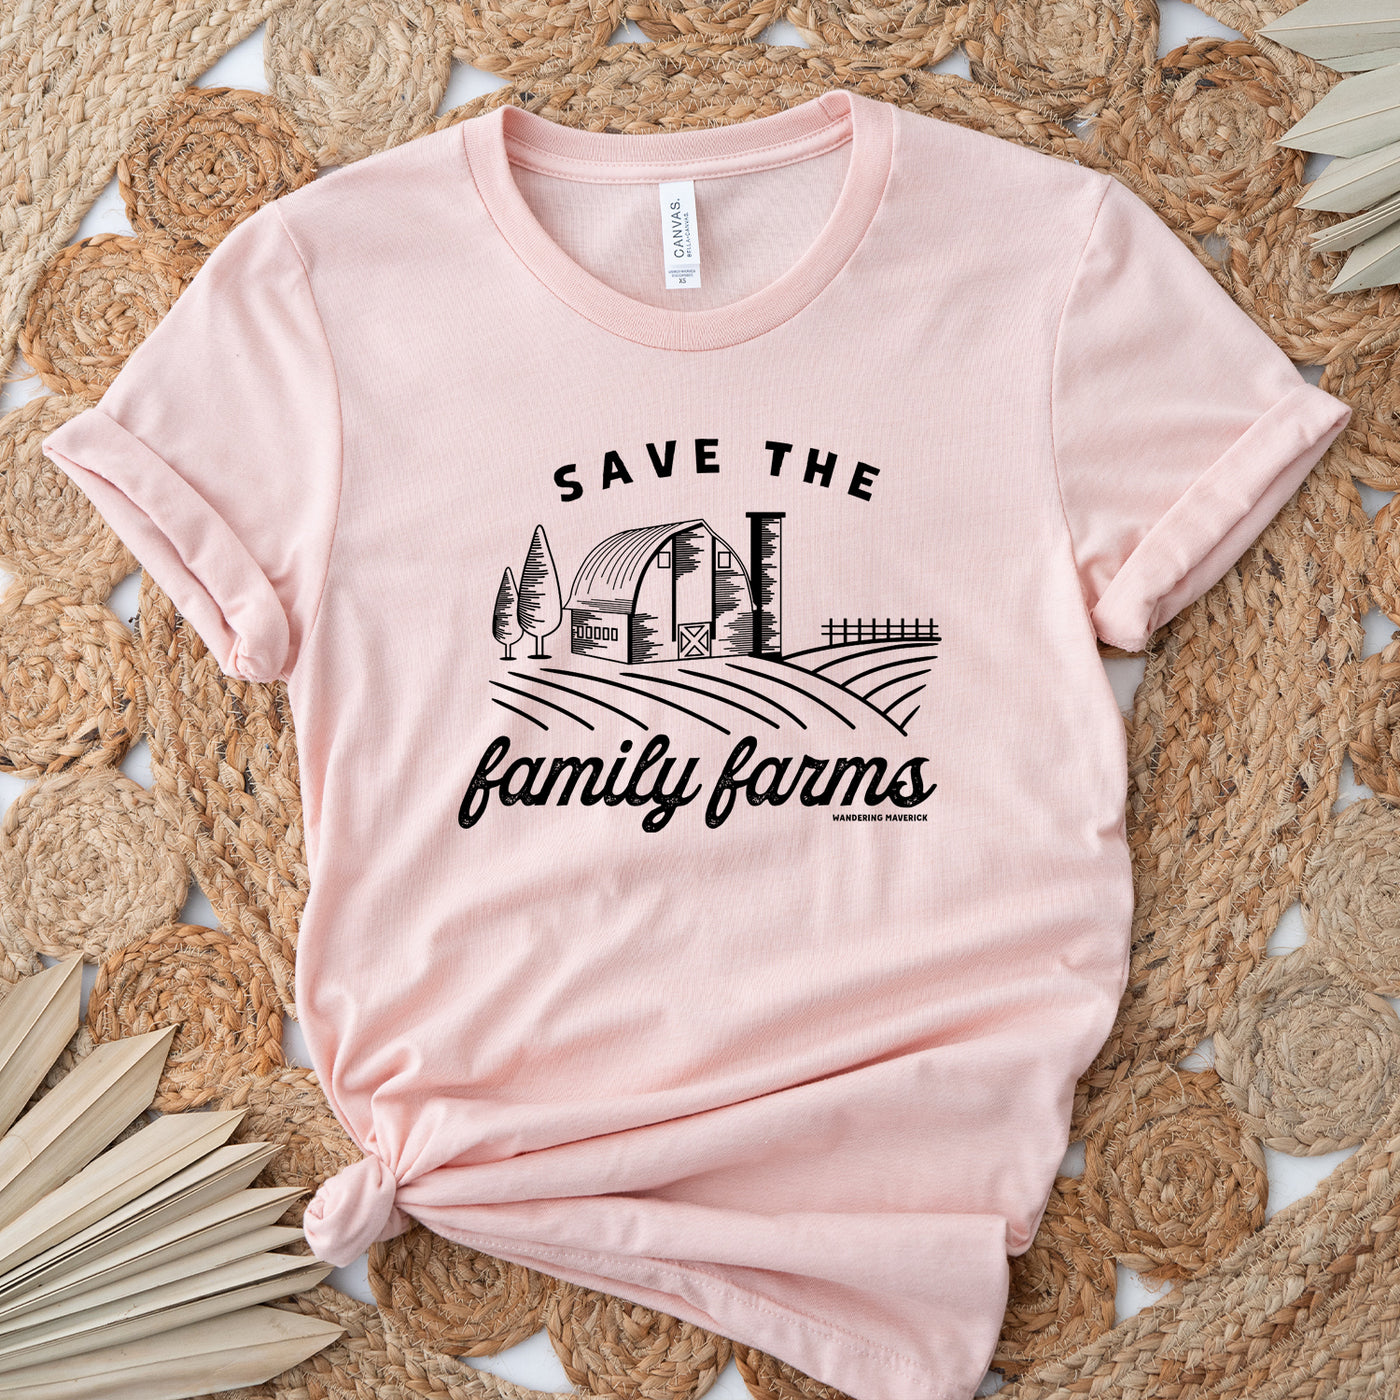 Save The Family Farms T-Shirt (XS-4XL) - Multiple Colors!